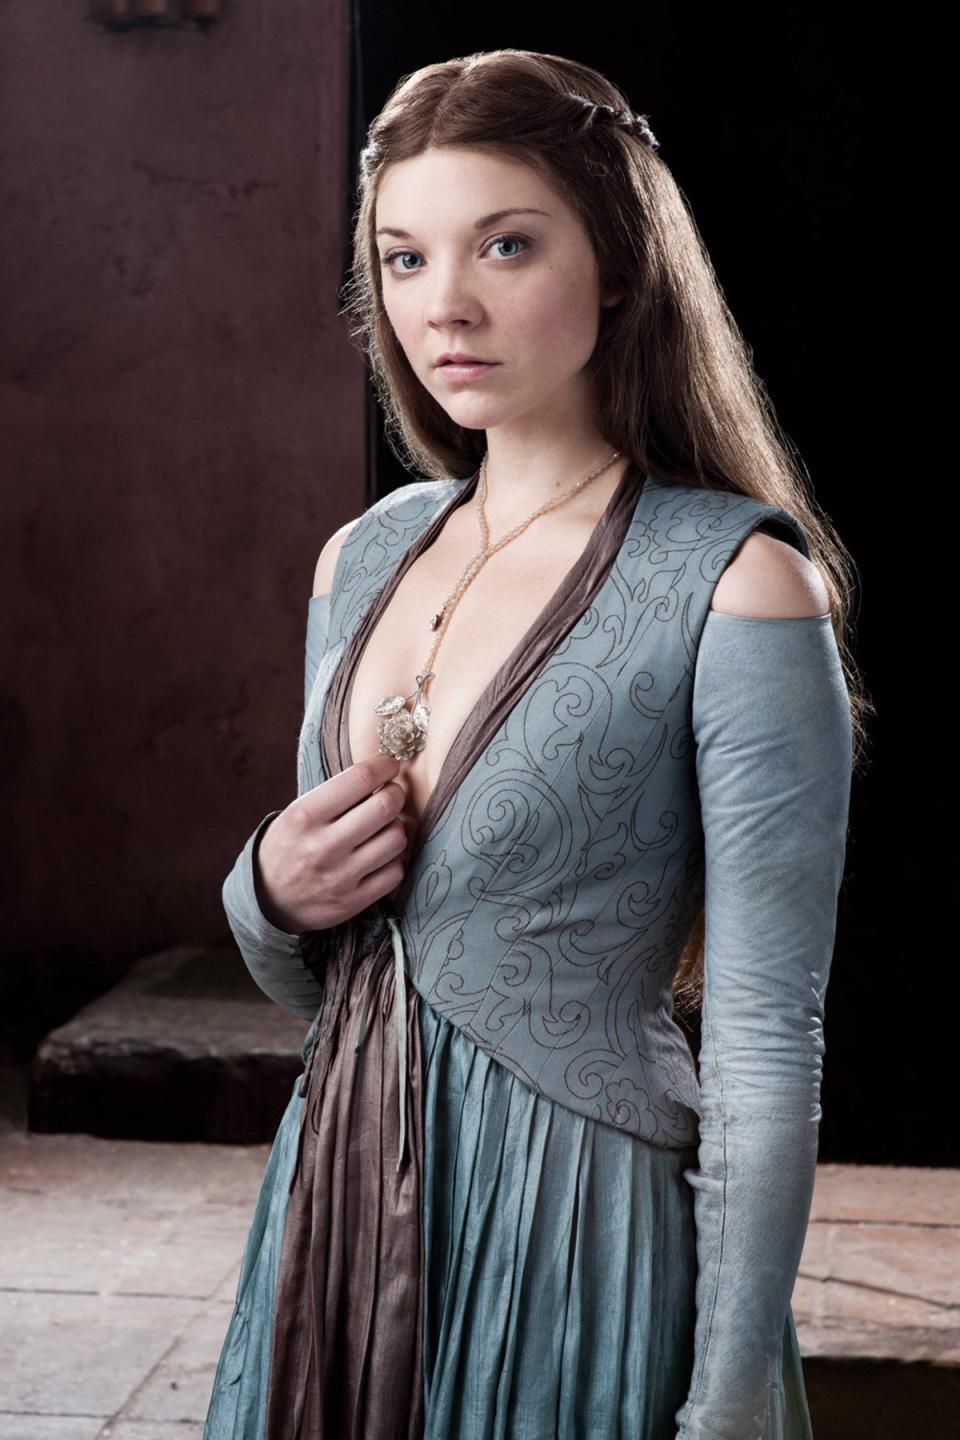 Dormer played Margaery Tyrell on Game of Thrones (HBO)